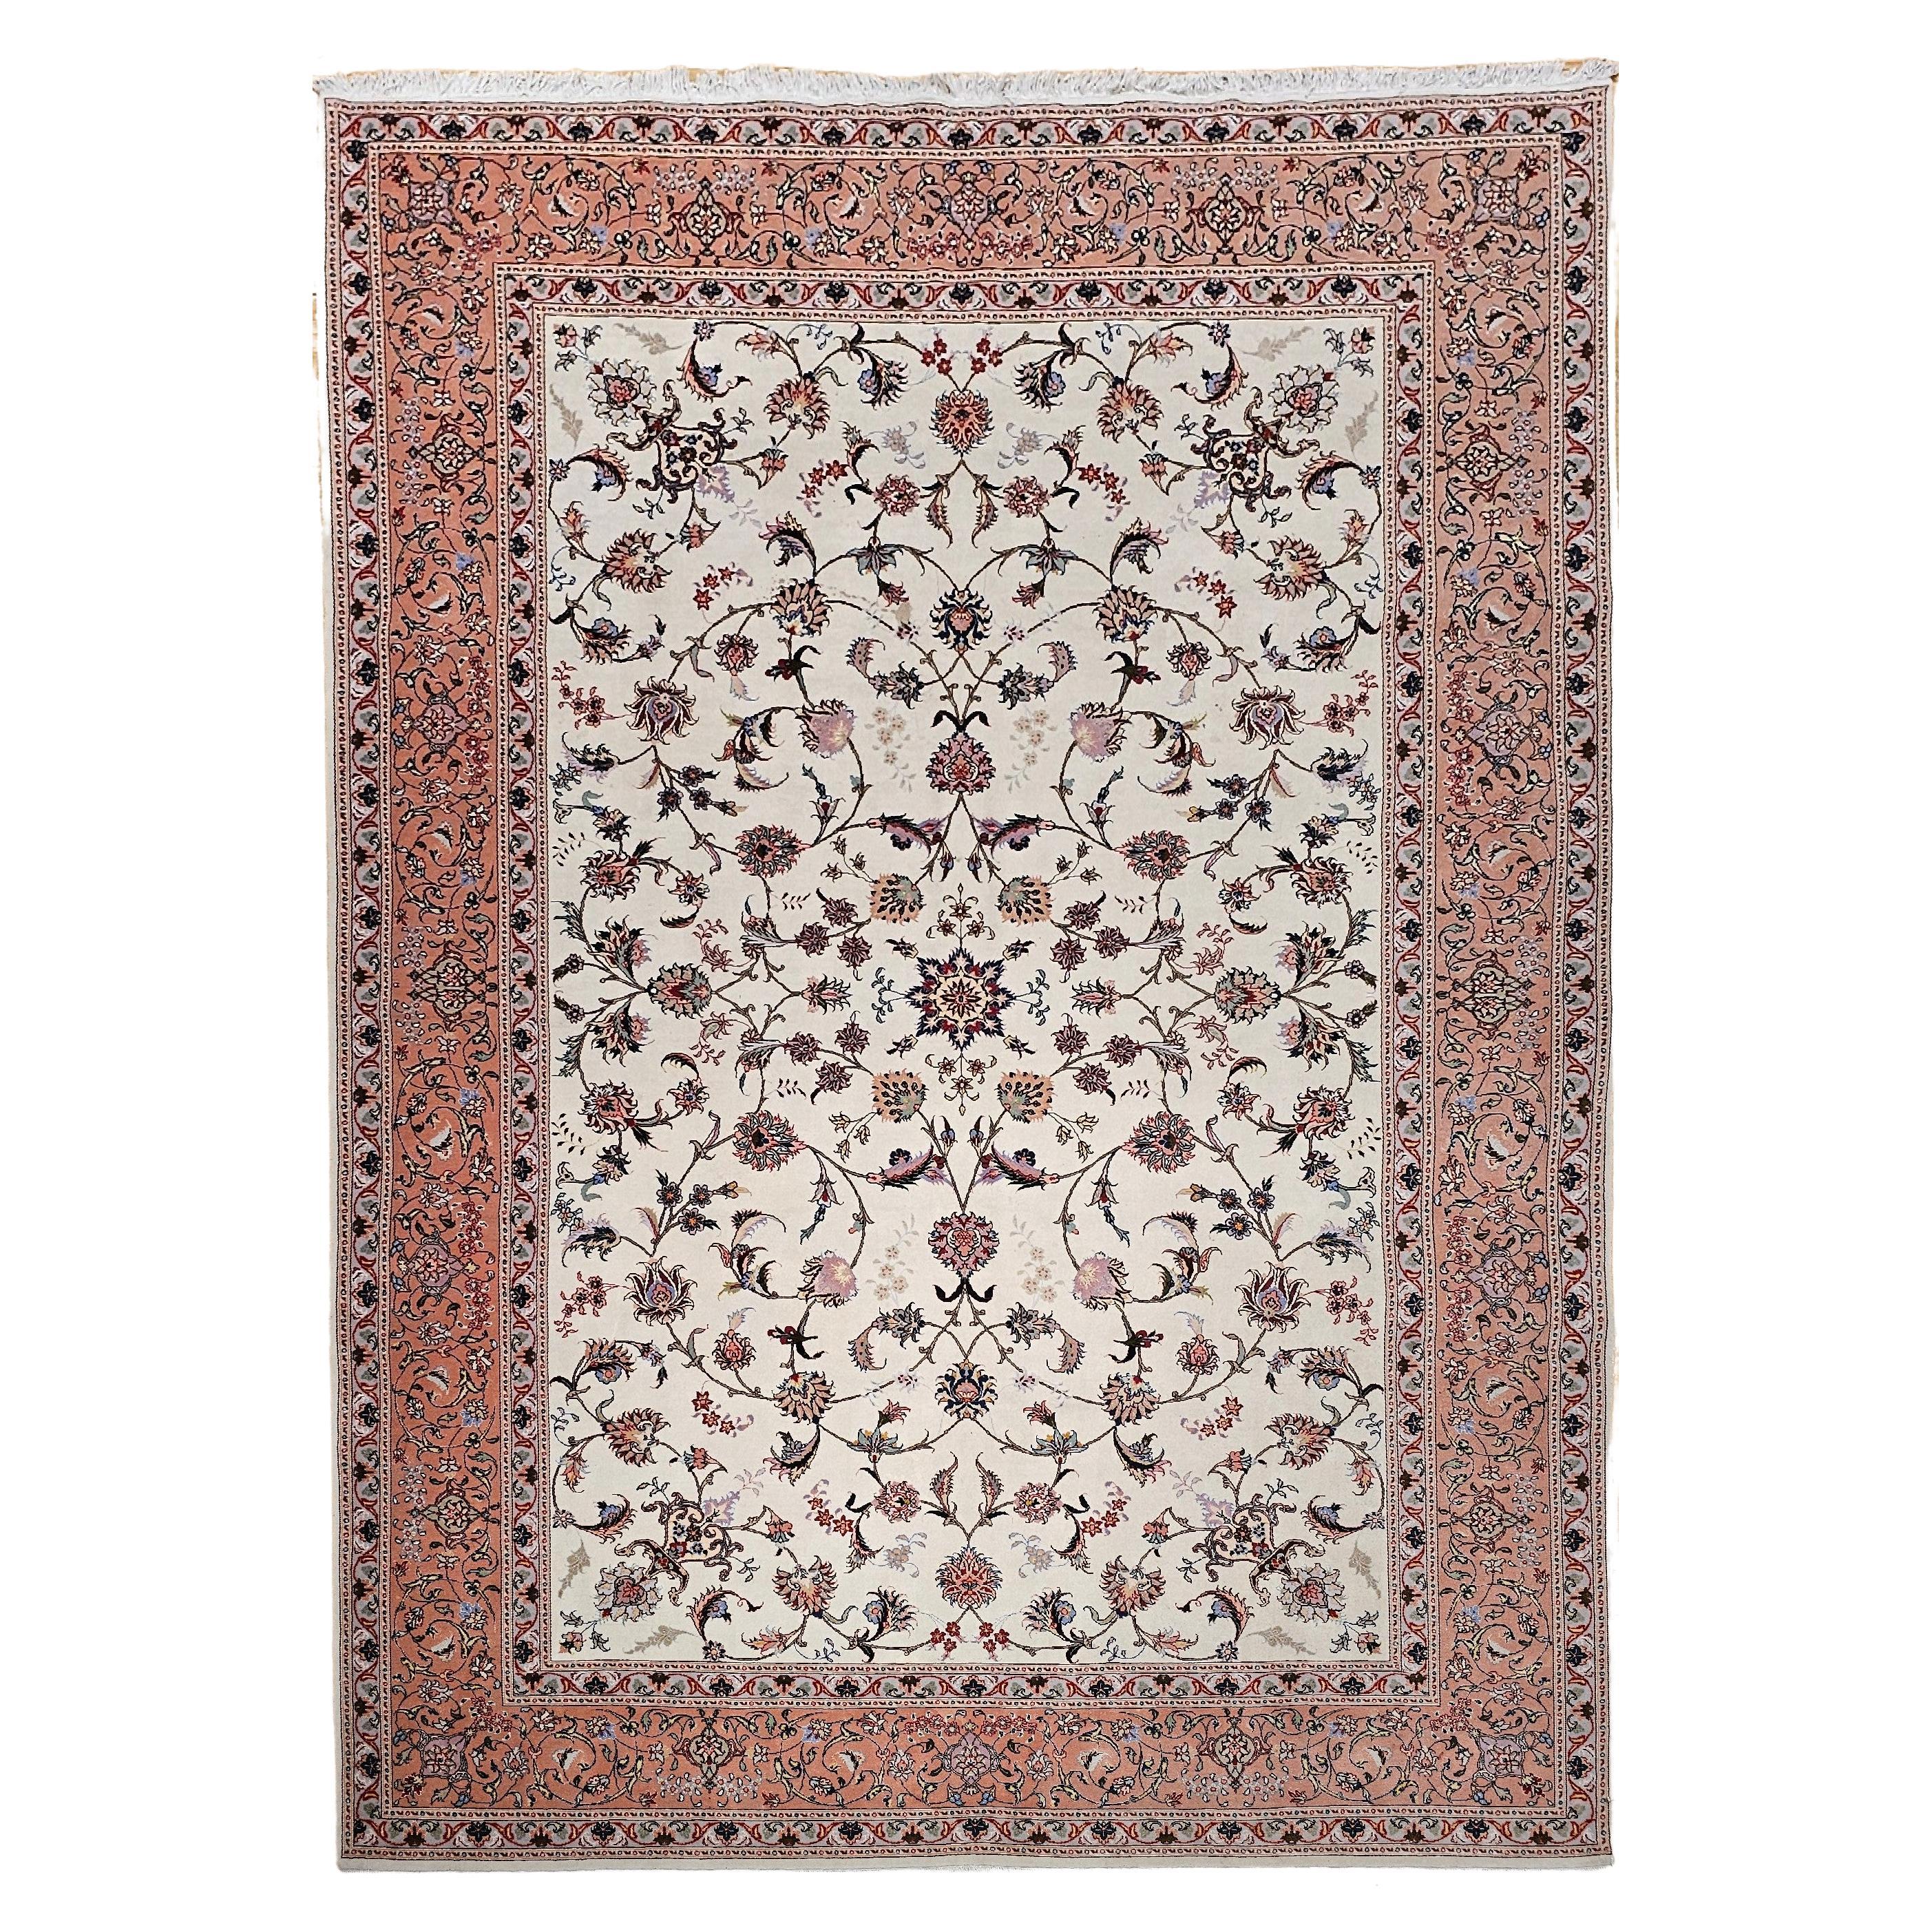 Vintage Persian Tabriz in Allover Floral Pattern in Ivory, Pink, Red, Blue